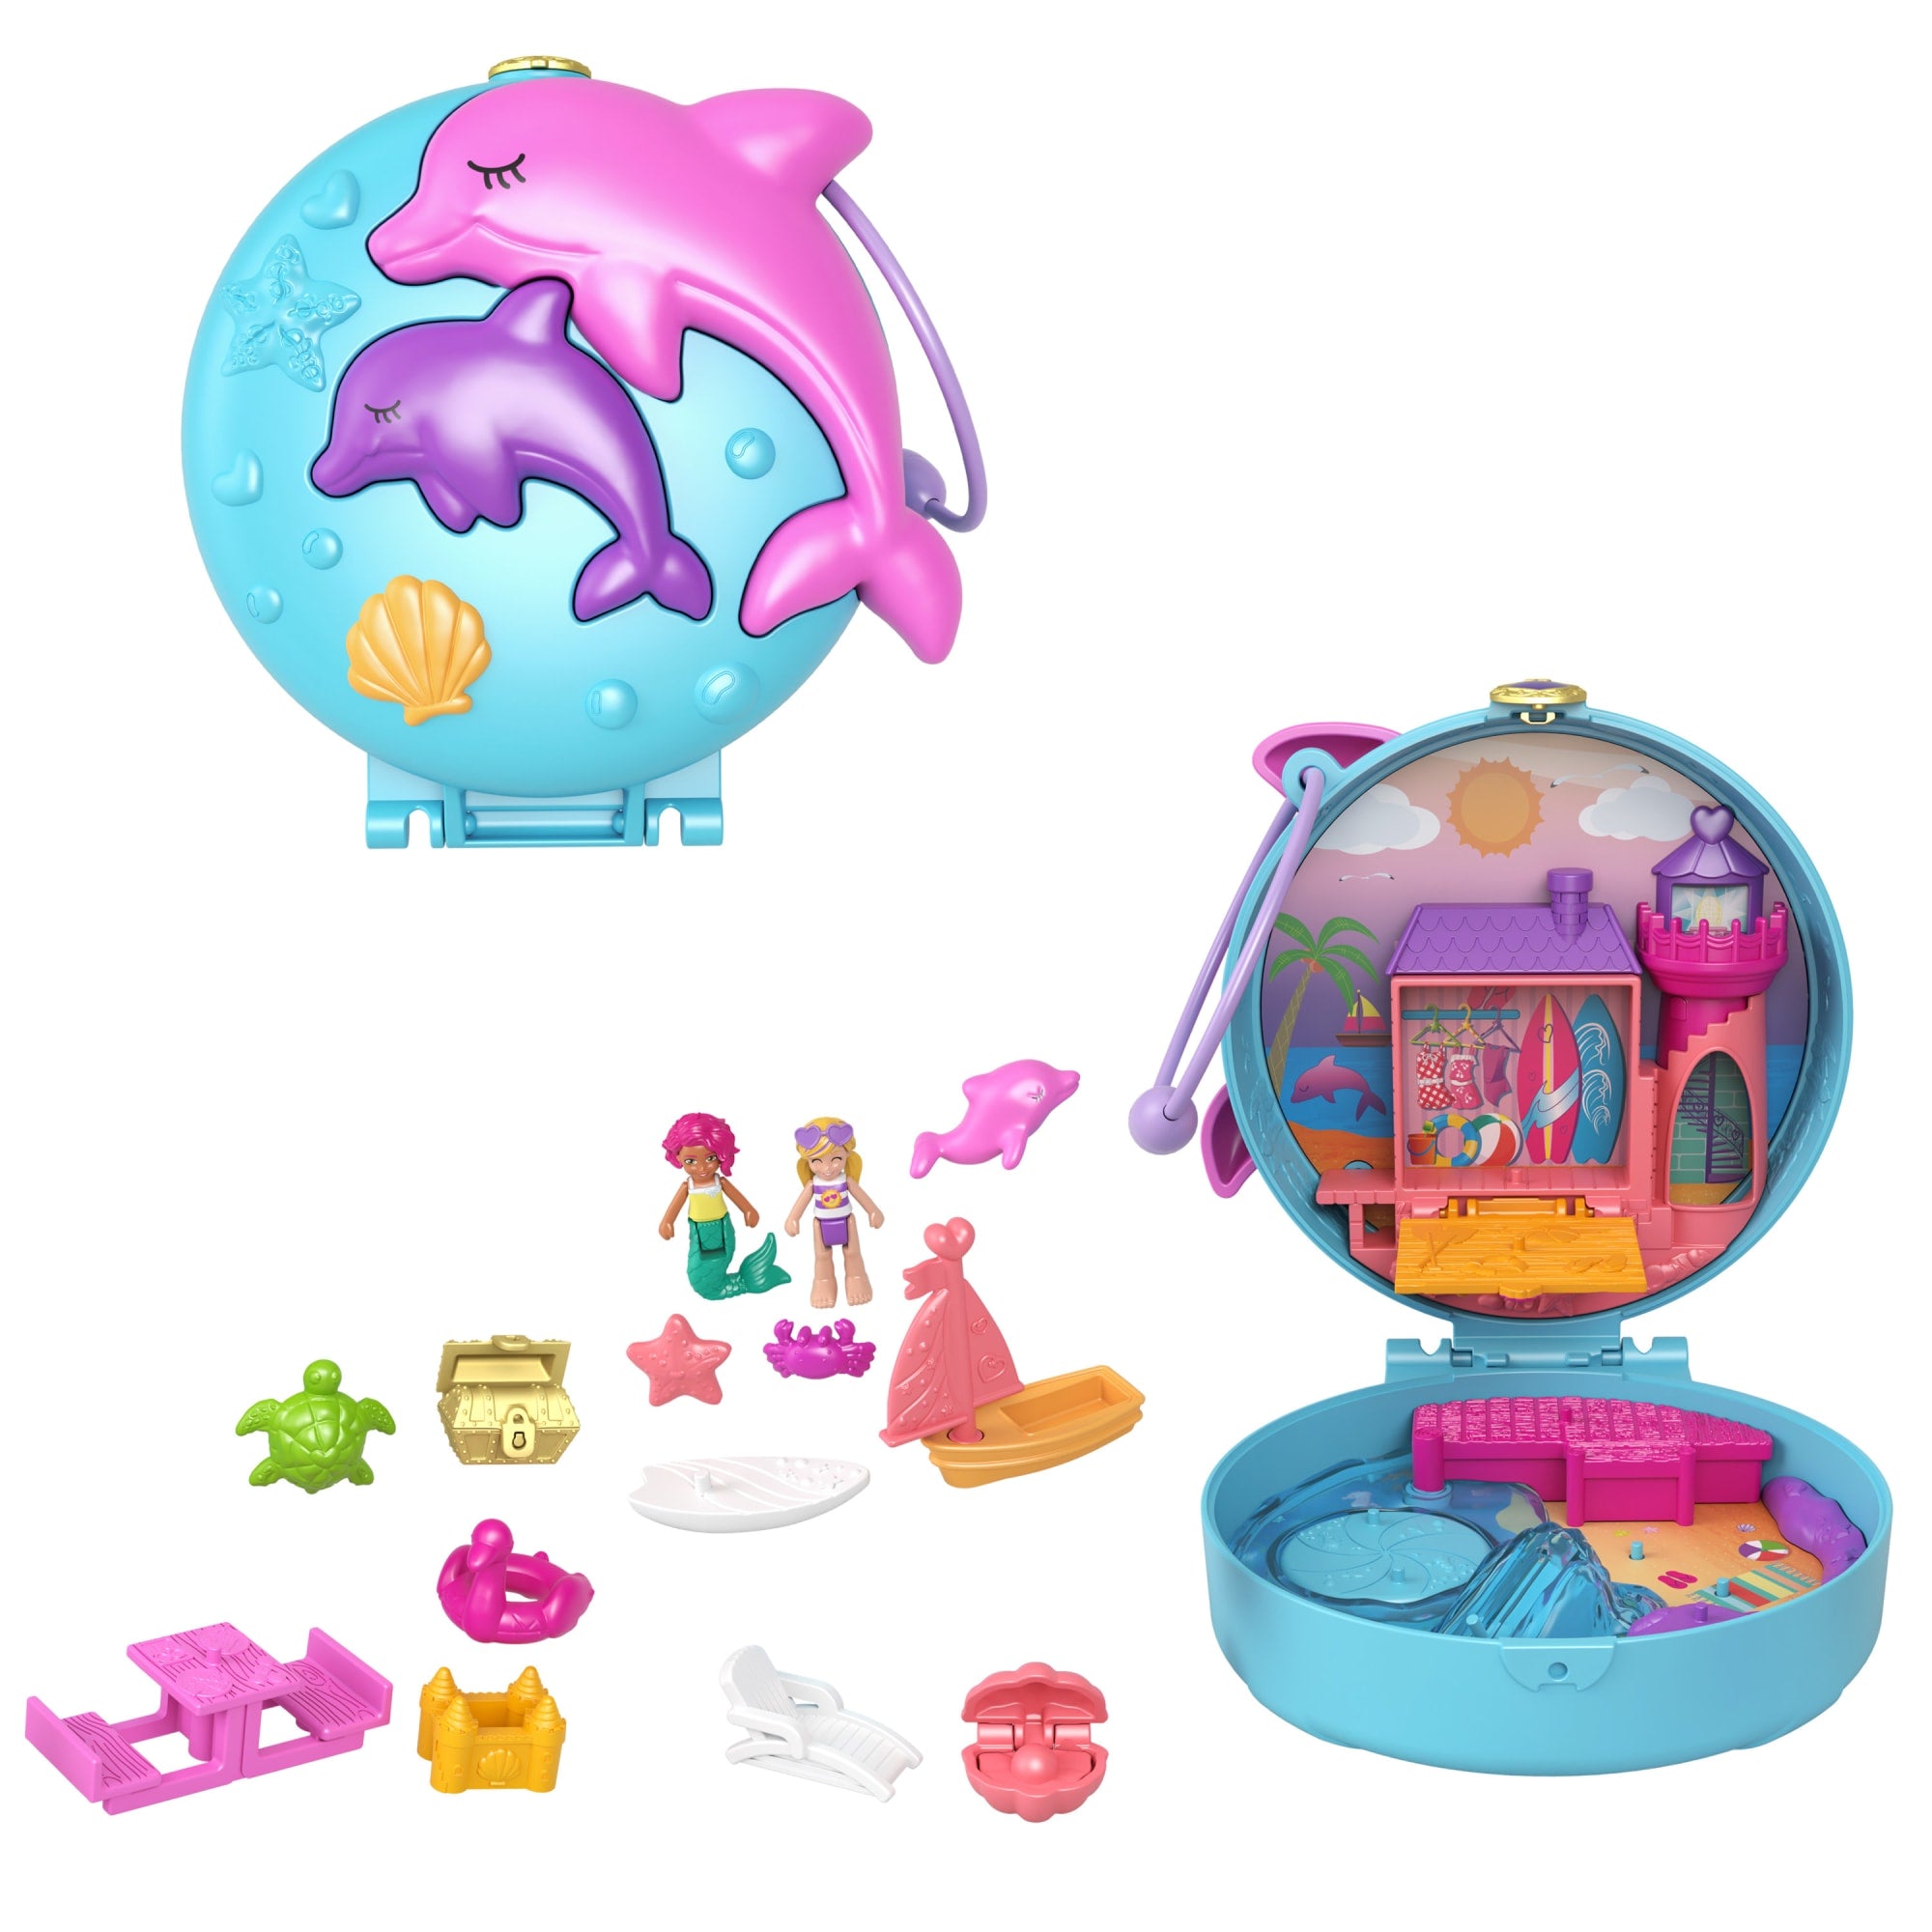 For the last Polly Pocket I own, we have a cute dolphin compact